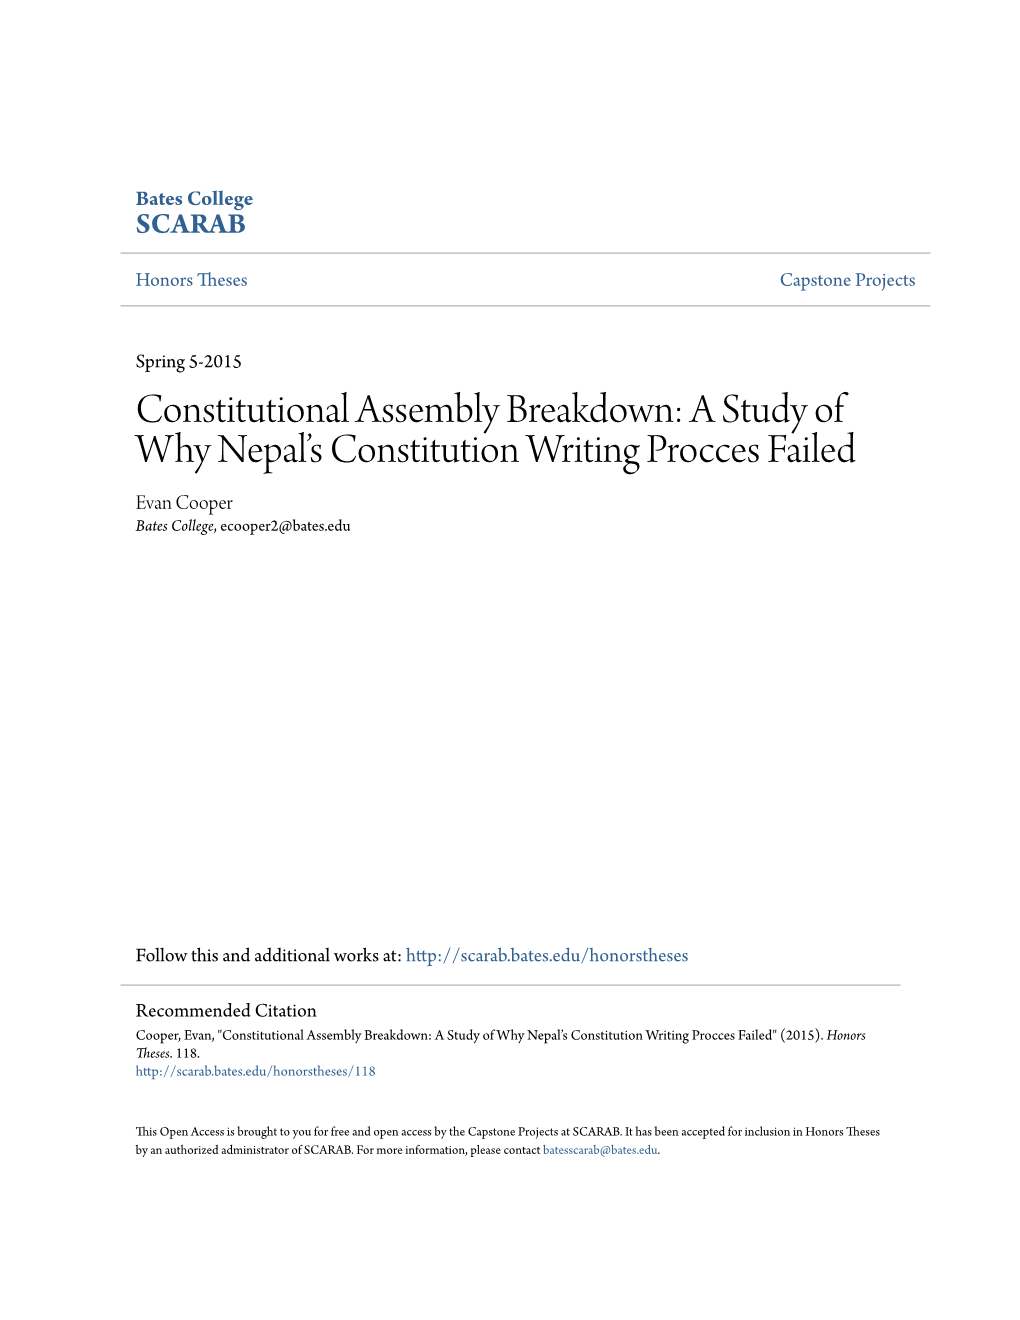 Constitutional Assembly Breakdown: a Study of Why Nepal’S Constitution Writing Procces Failed Evan Cooper Bates College, Ecooper2@Bates.Edu